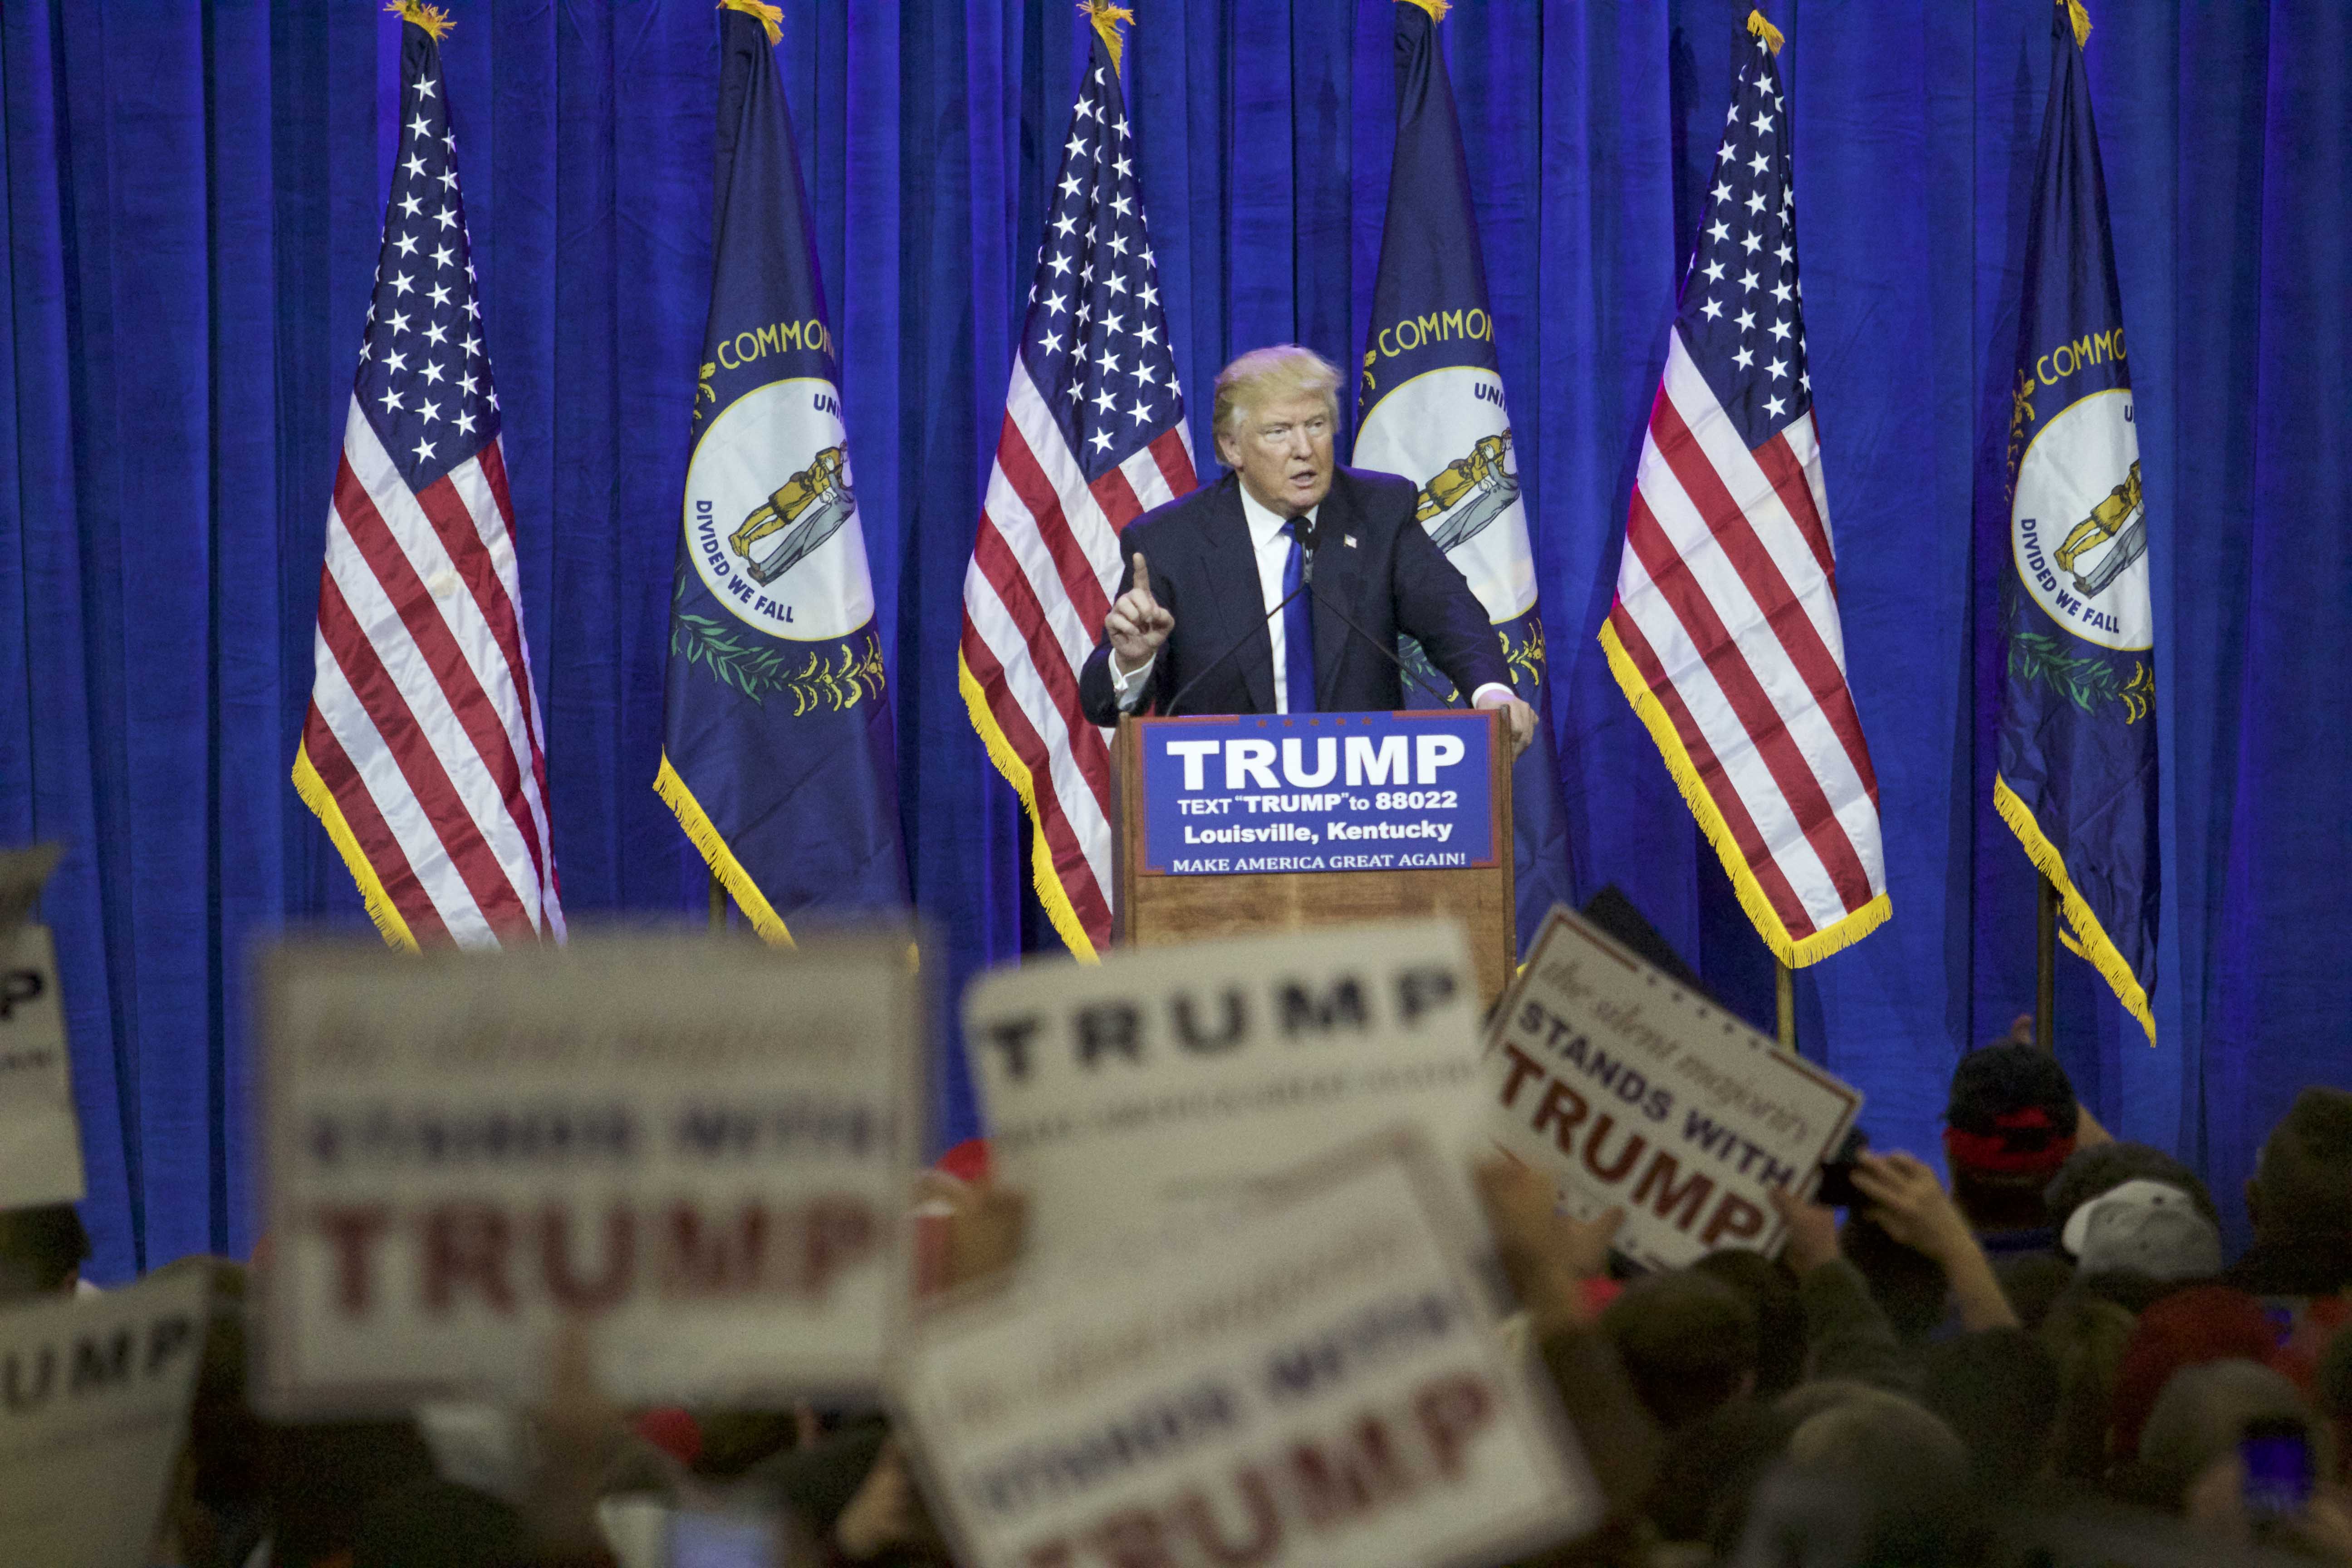 Trump+makes+campaign+trail+stop+in+Louisville+on+Super+Tuesday